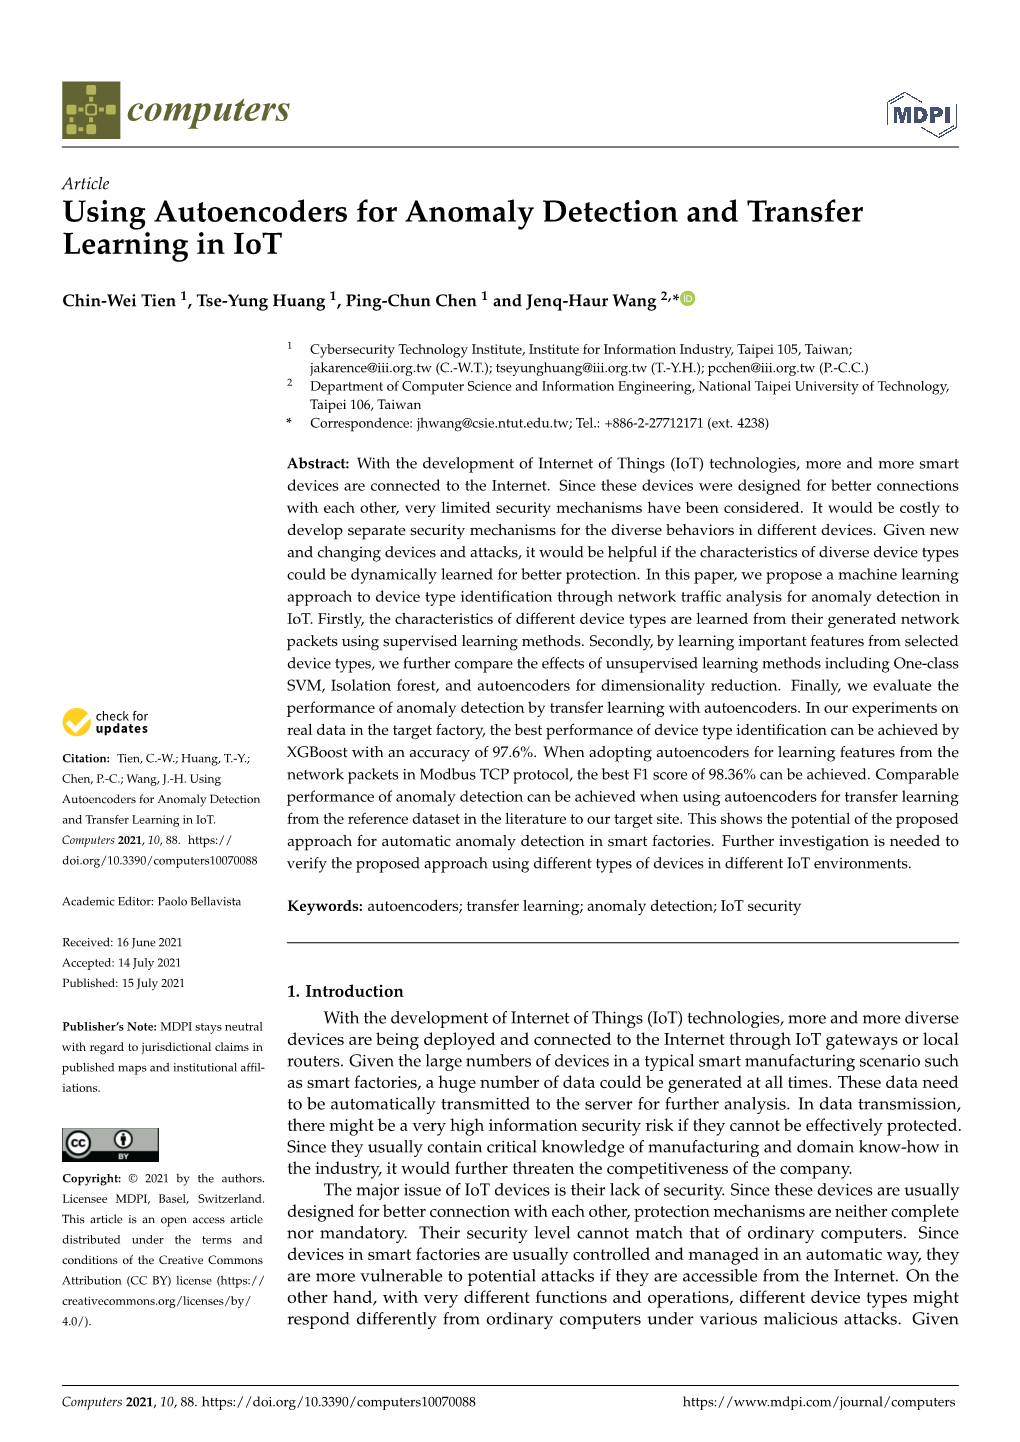 Using Autoencoders for Anomaly Detection and Transfer Learning in Iot